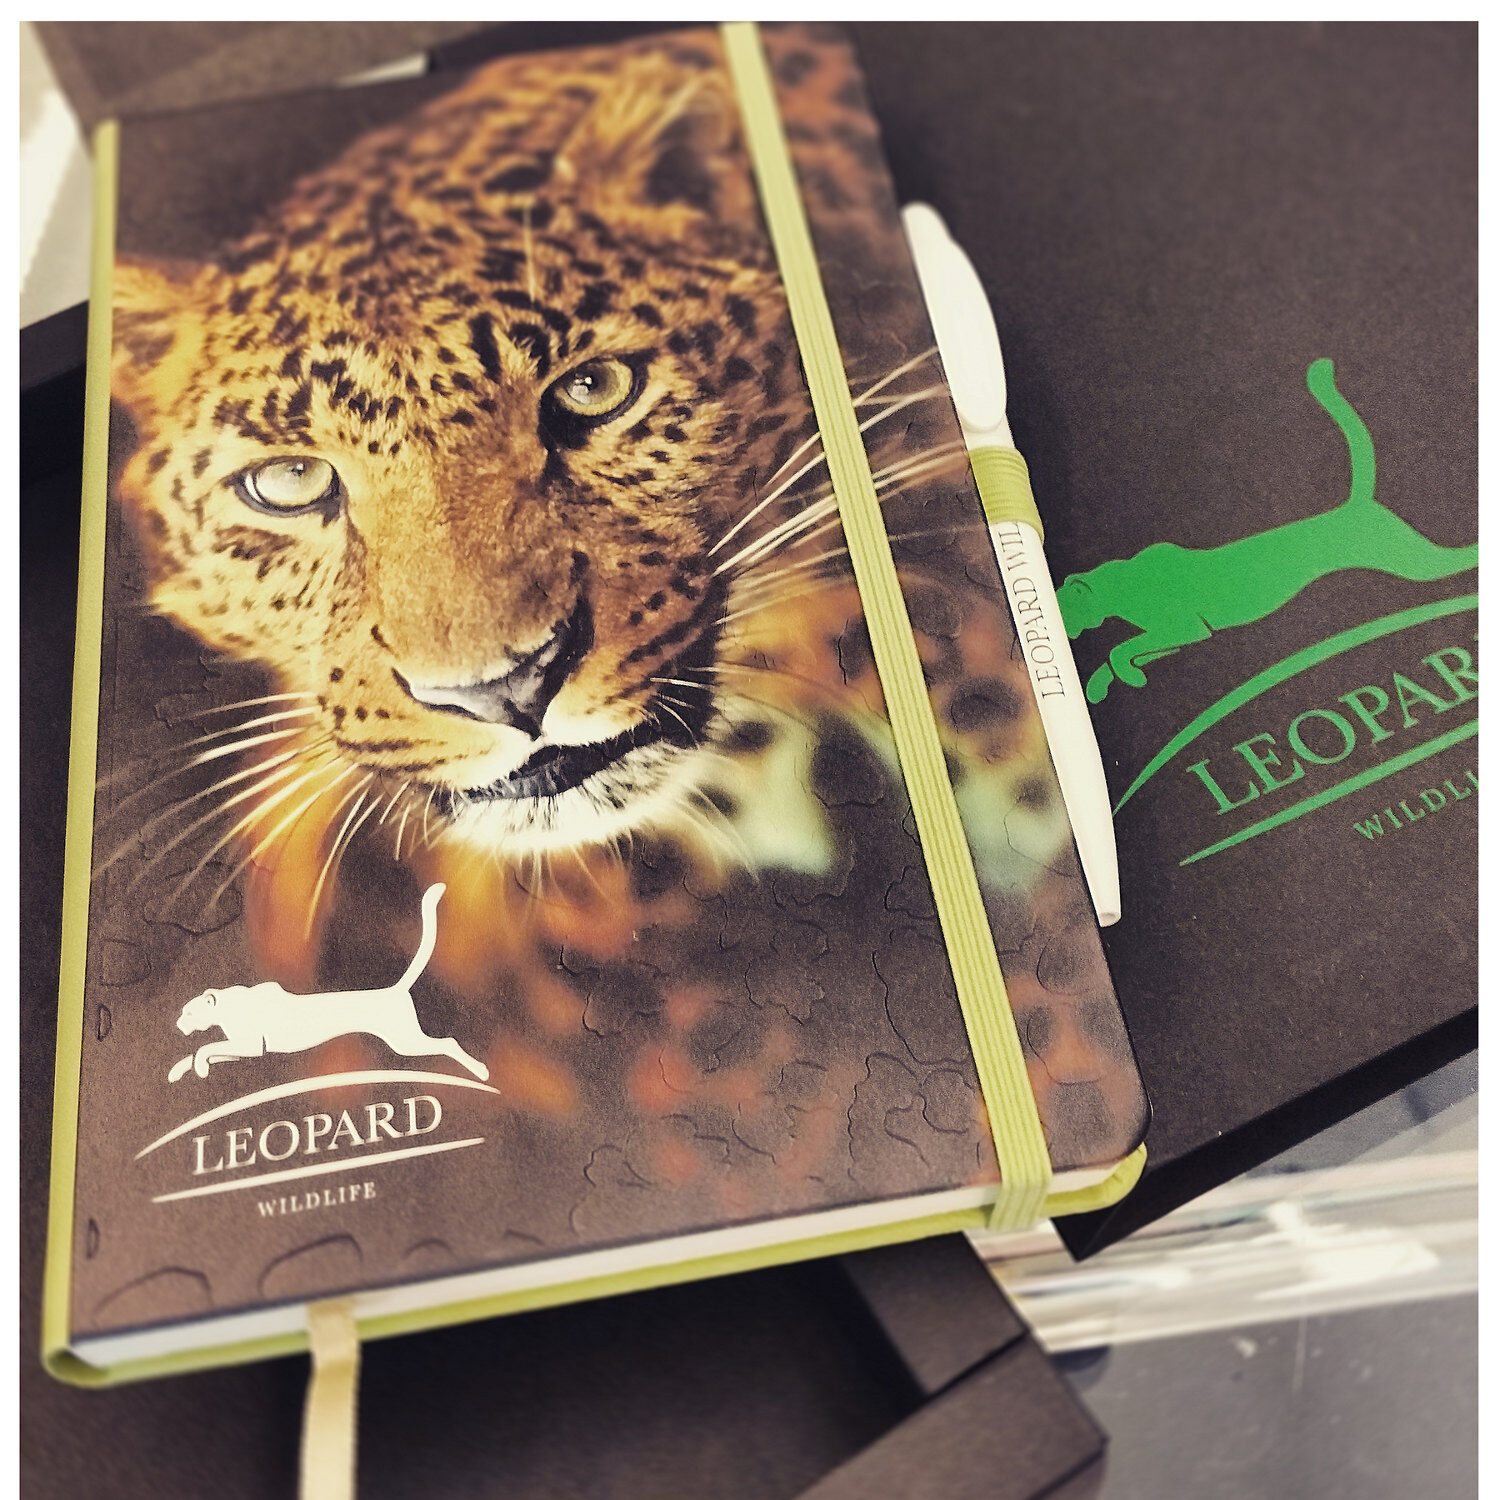 Notebooks with custom printed and embossed covers